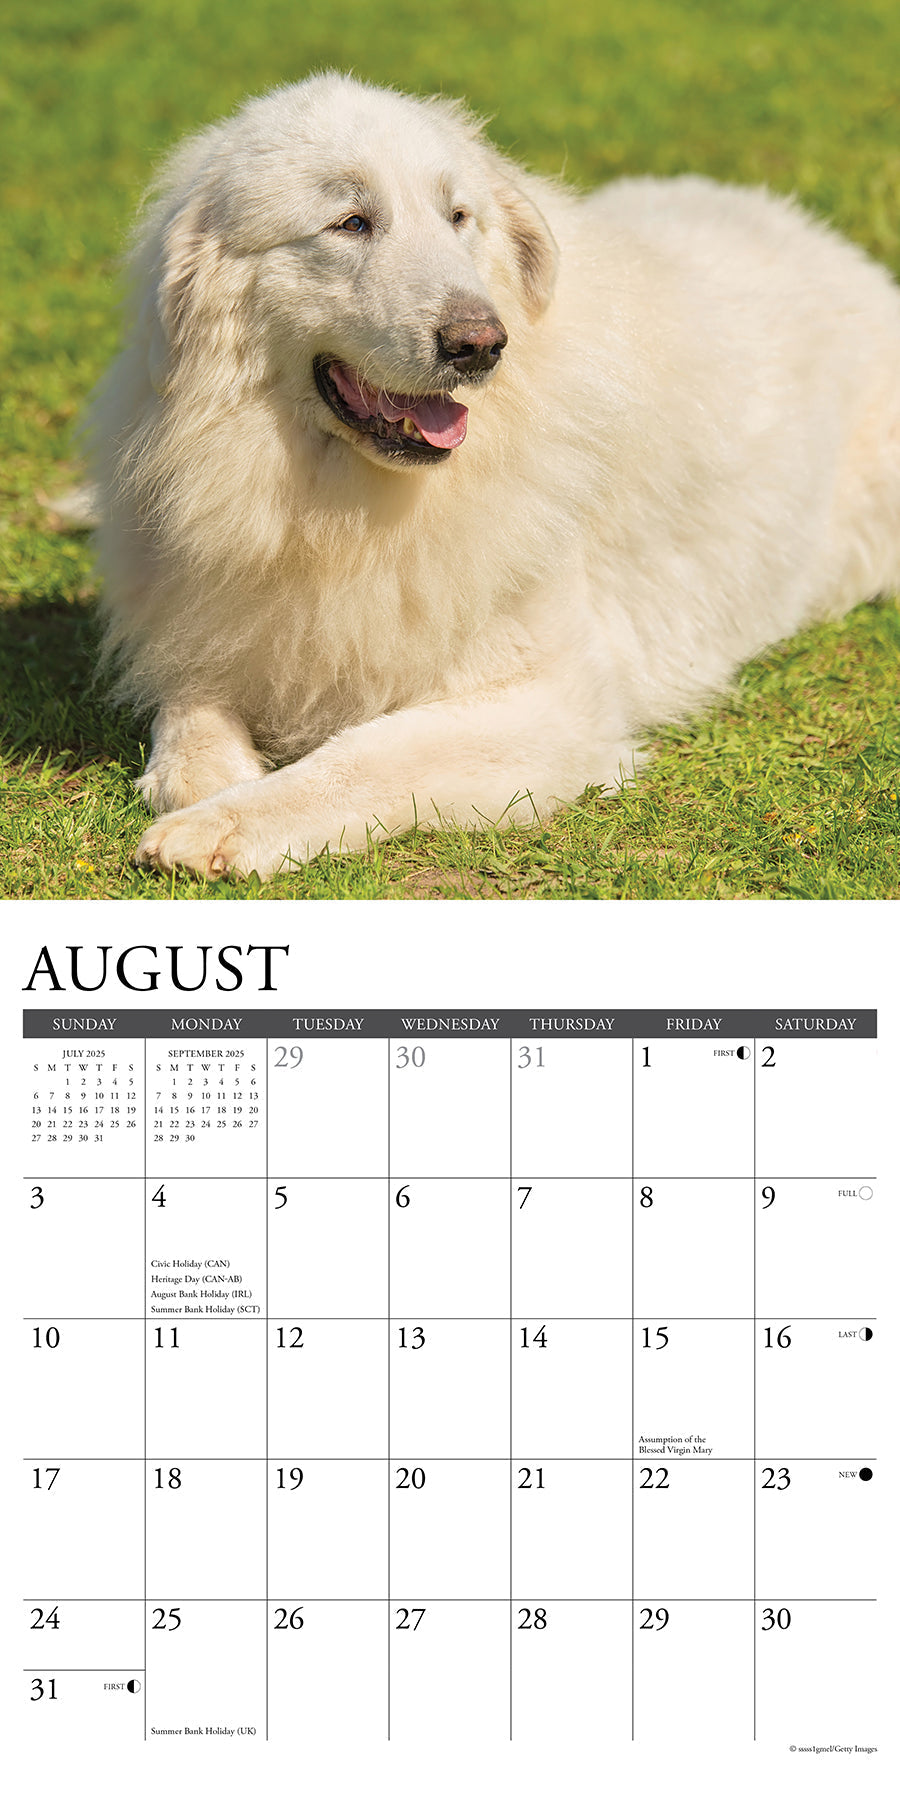 2025 Great Pyrenees - Square Wall Calendar (US Only)